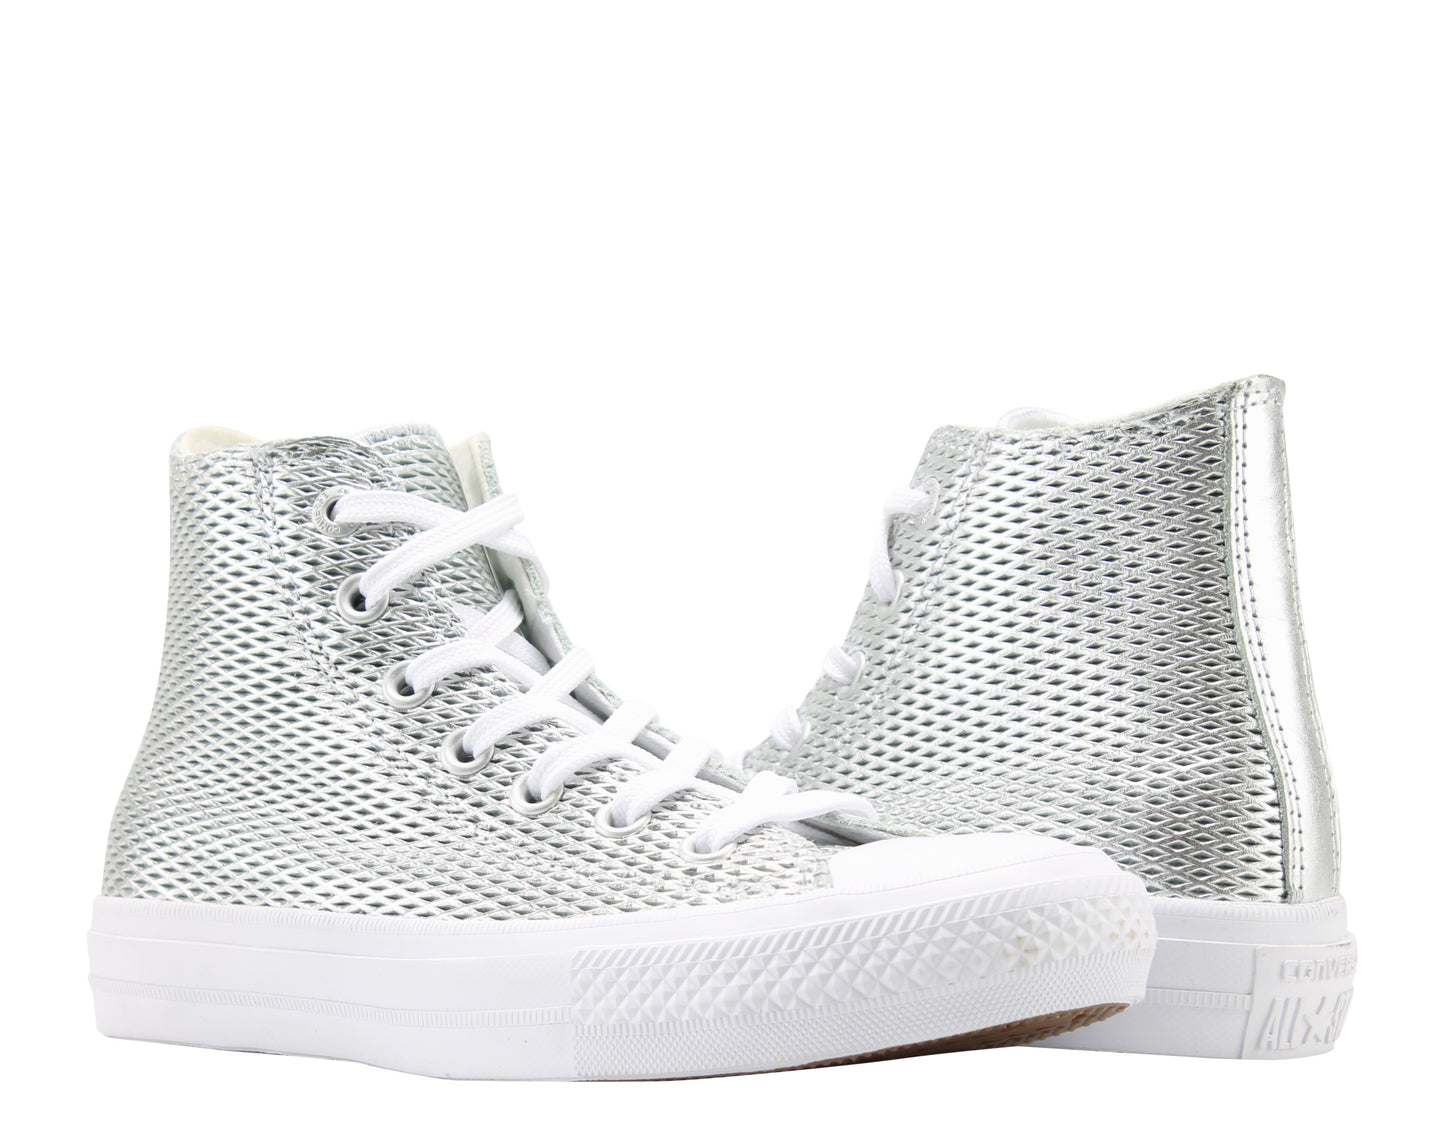 Converse Chuck Taylor All Star II High top Women's Sneakers